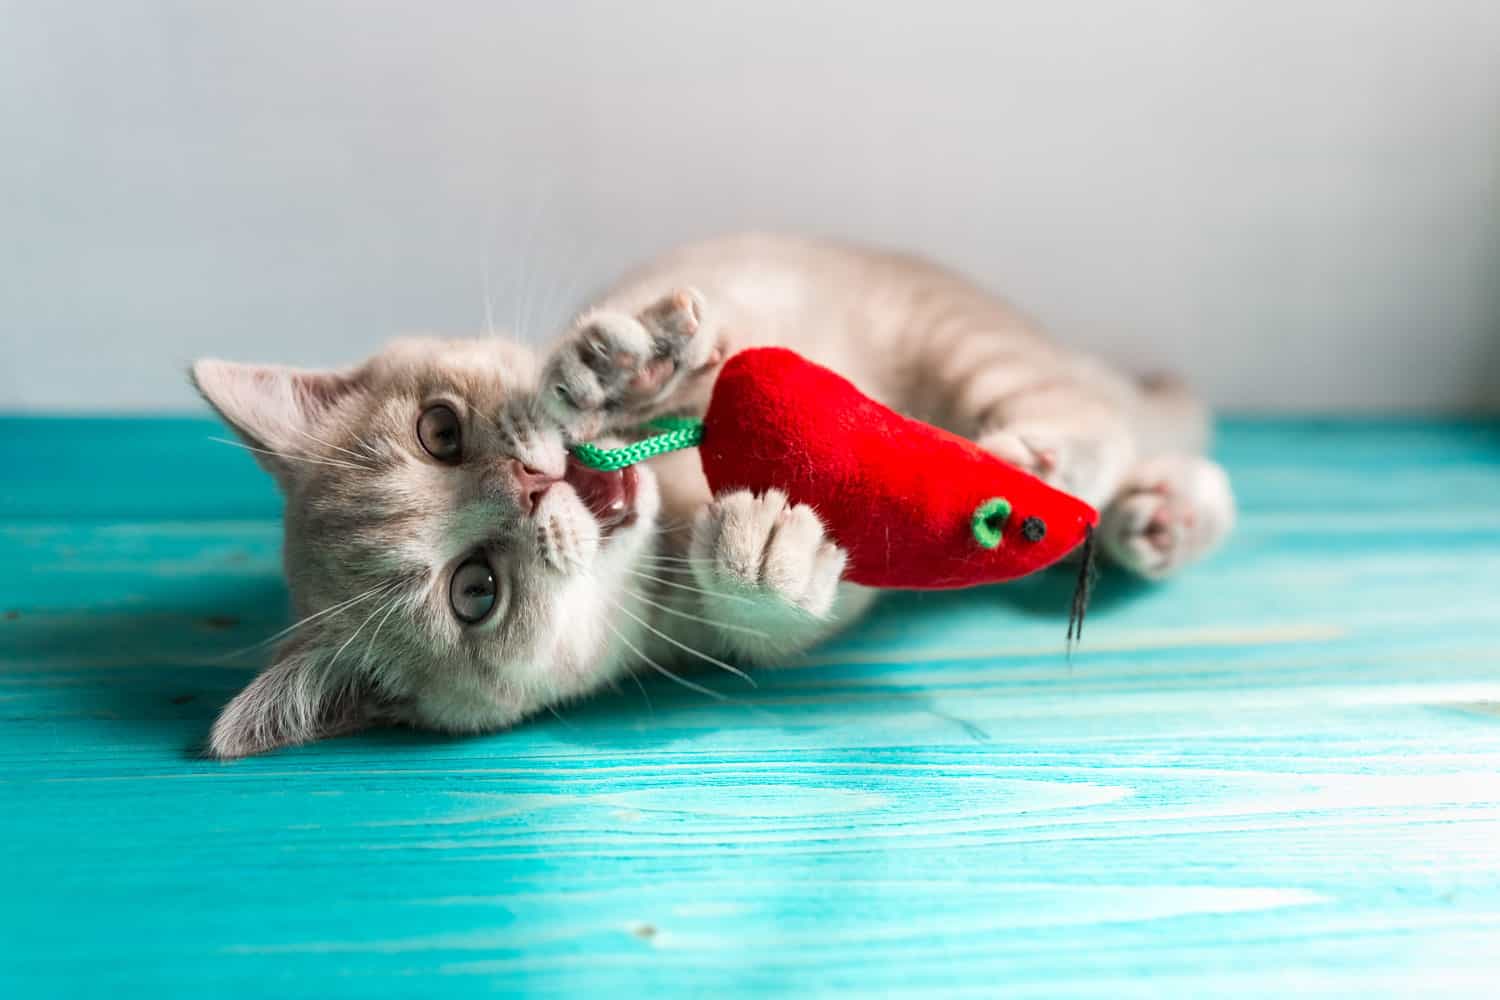 A cute cat kitten playing with his toy